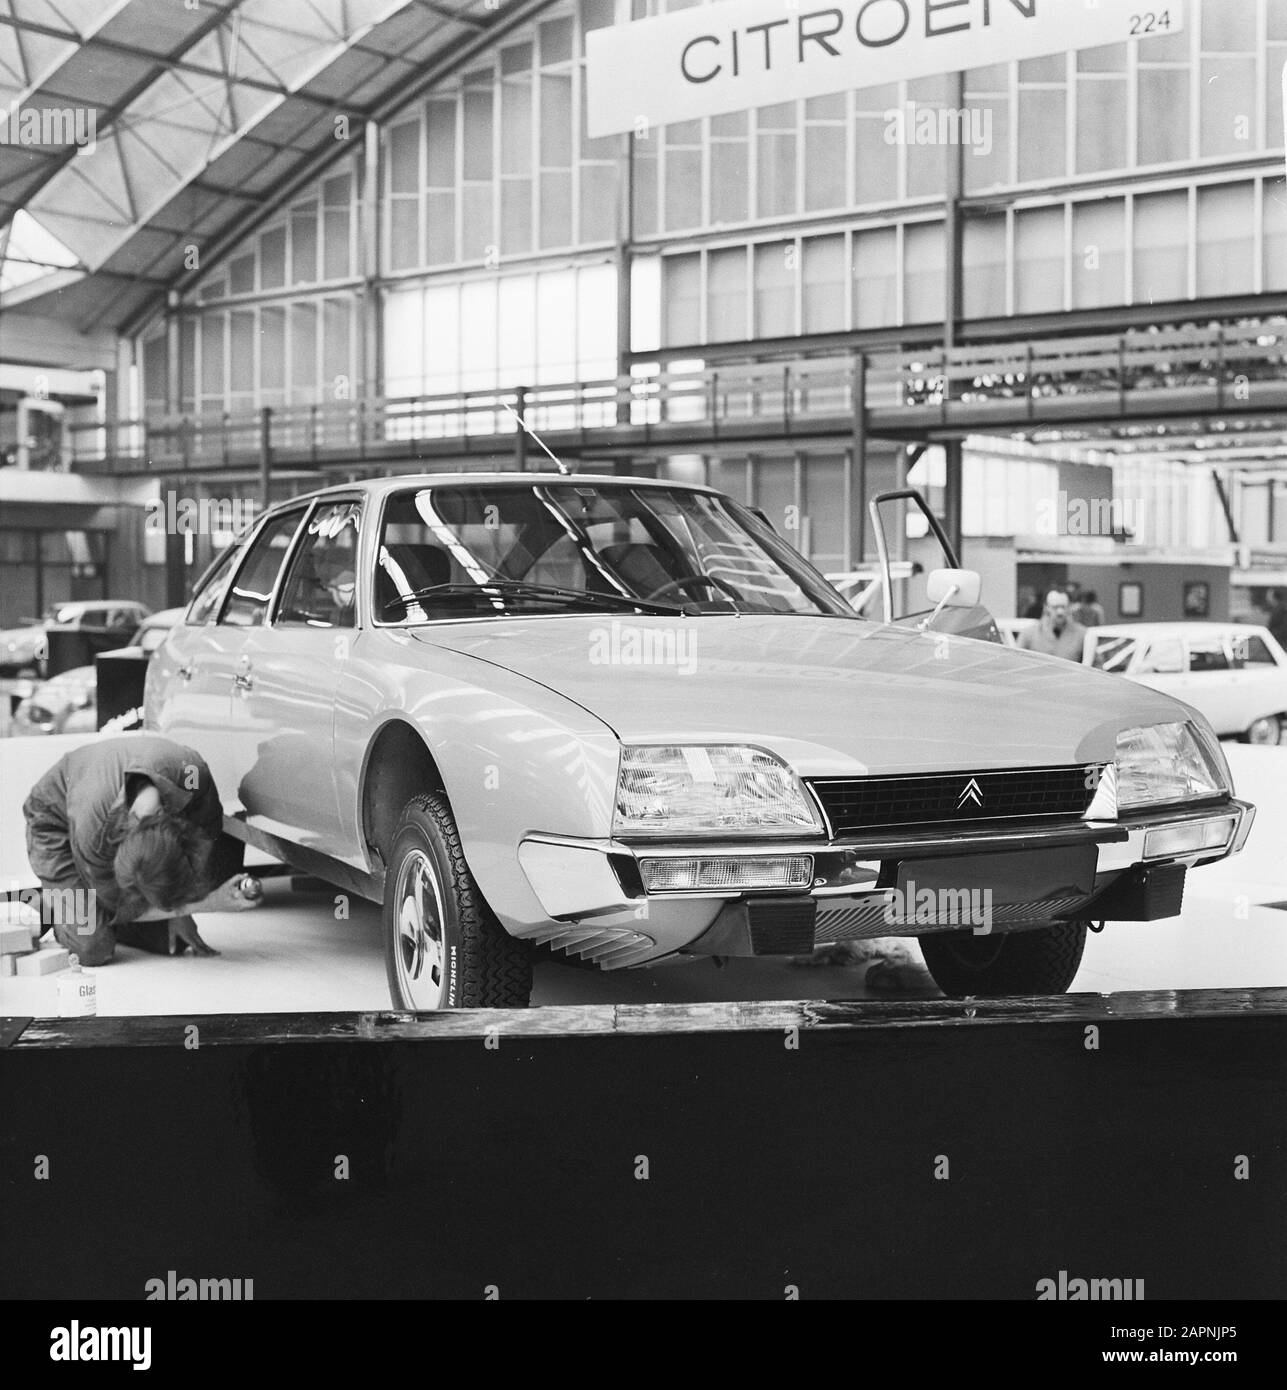 Preparation RAI-persons75 in Amsterdam, overview with the car of the year the Citroen CX Date: 11 February 1975 Location: Amsterdam, Noord-Holland Keywords: Cars, exhibitions Institution name: RAI Stock Photo